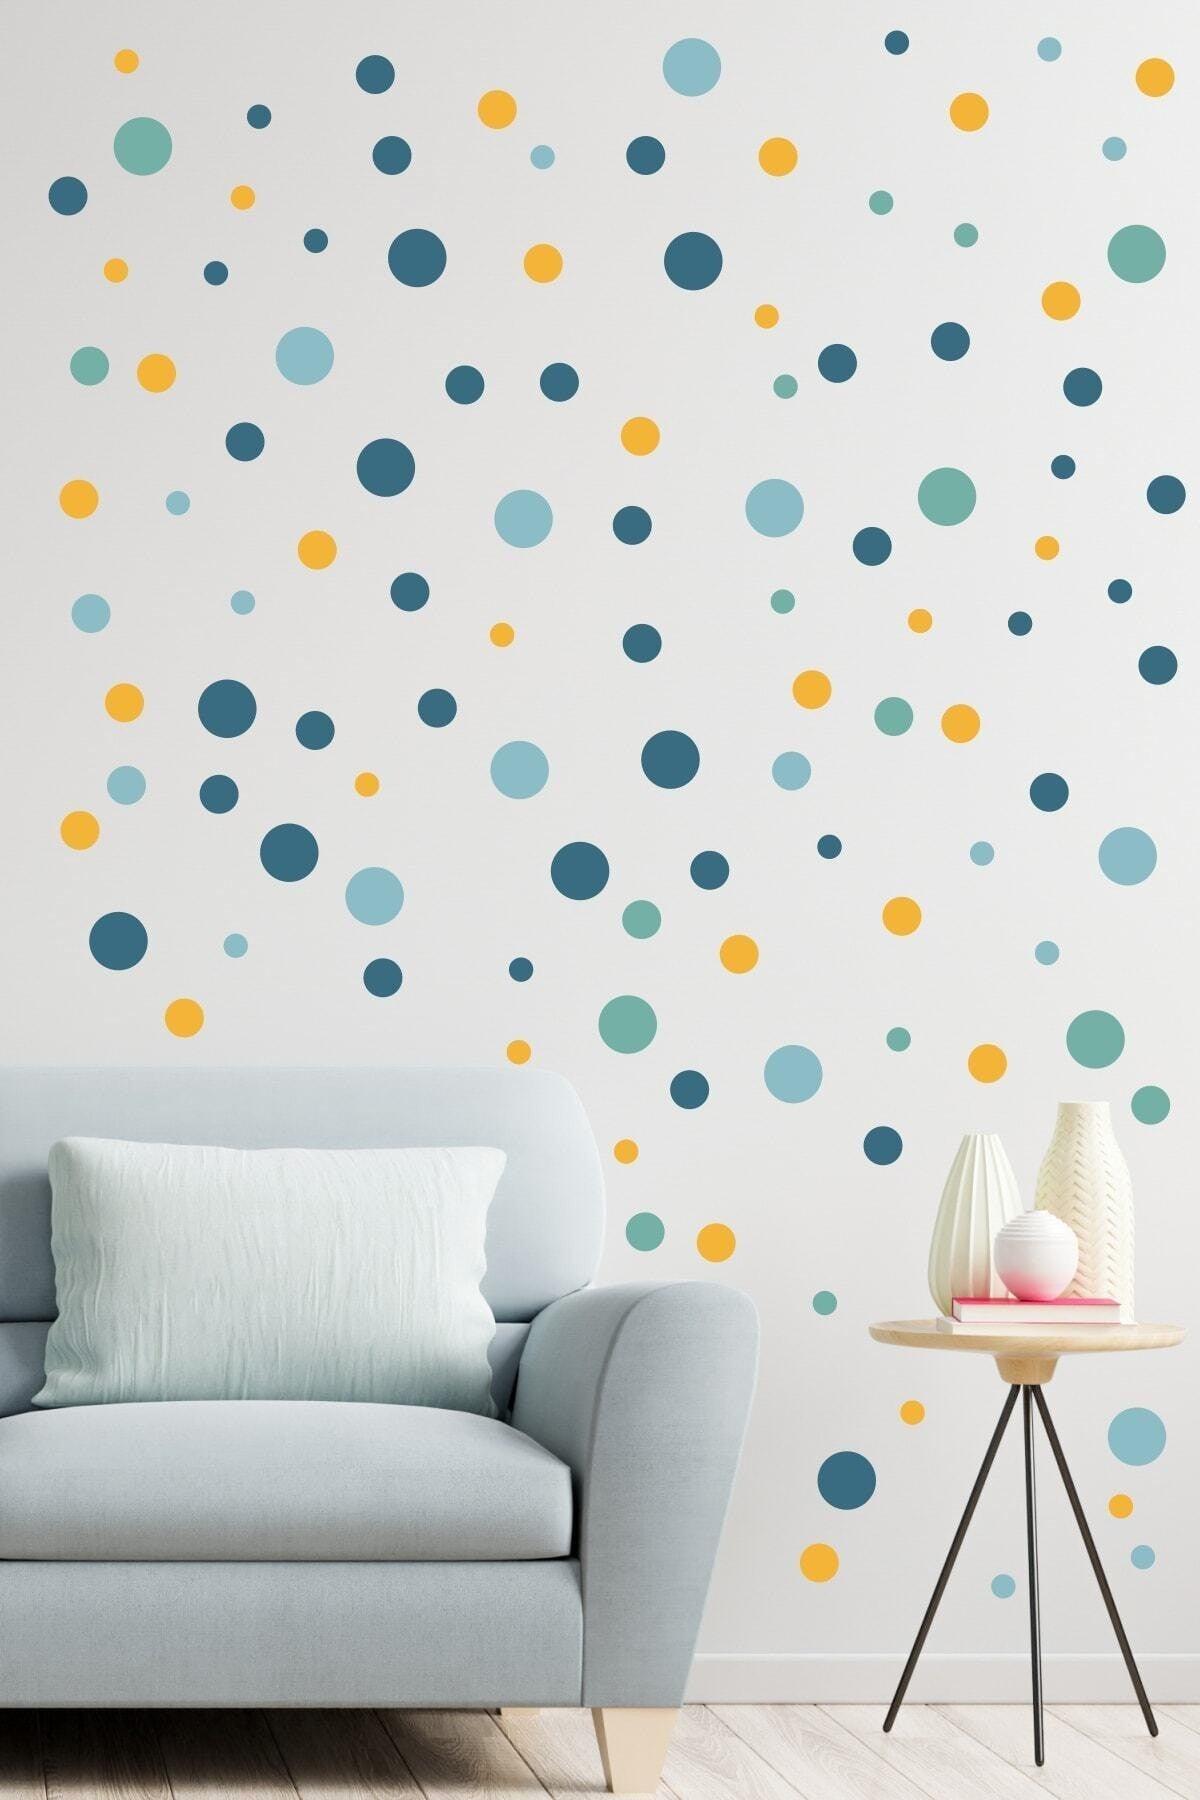 Big and Small Round Shape Wall in Blue Tone